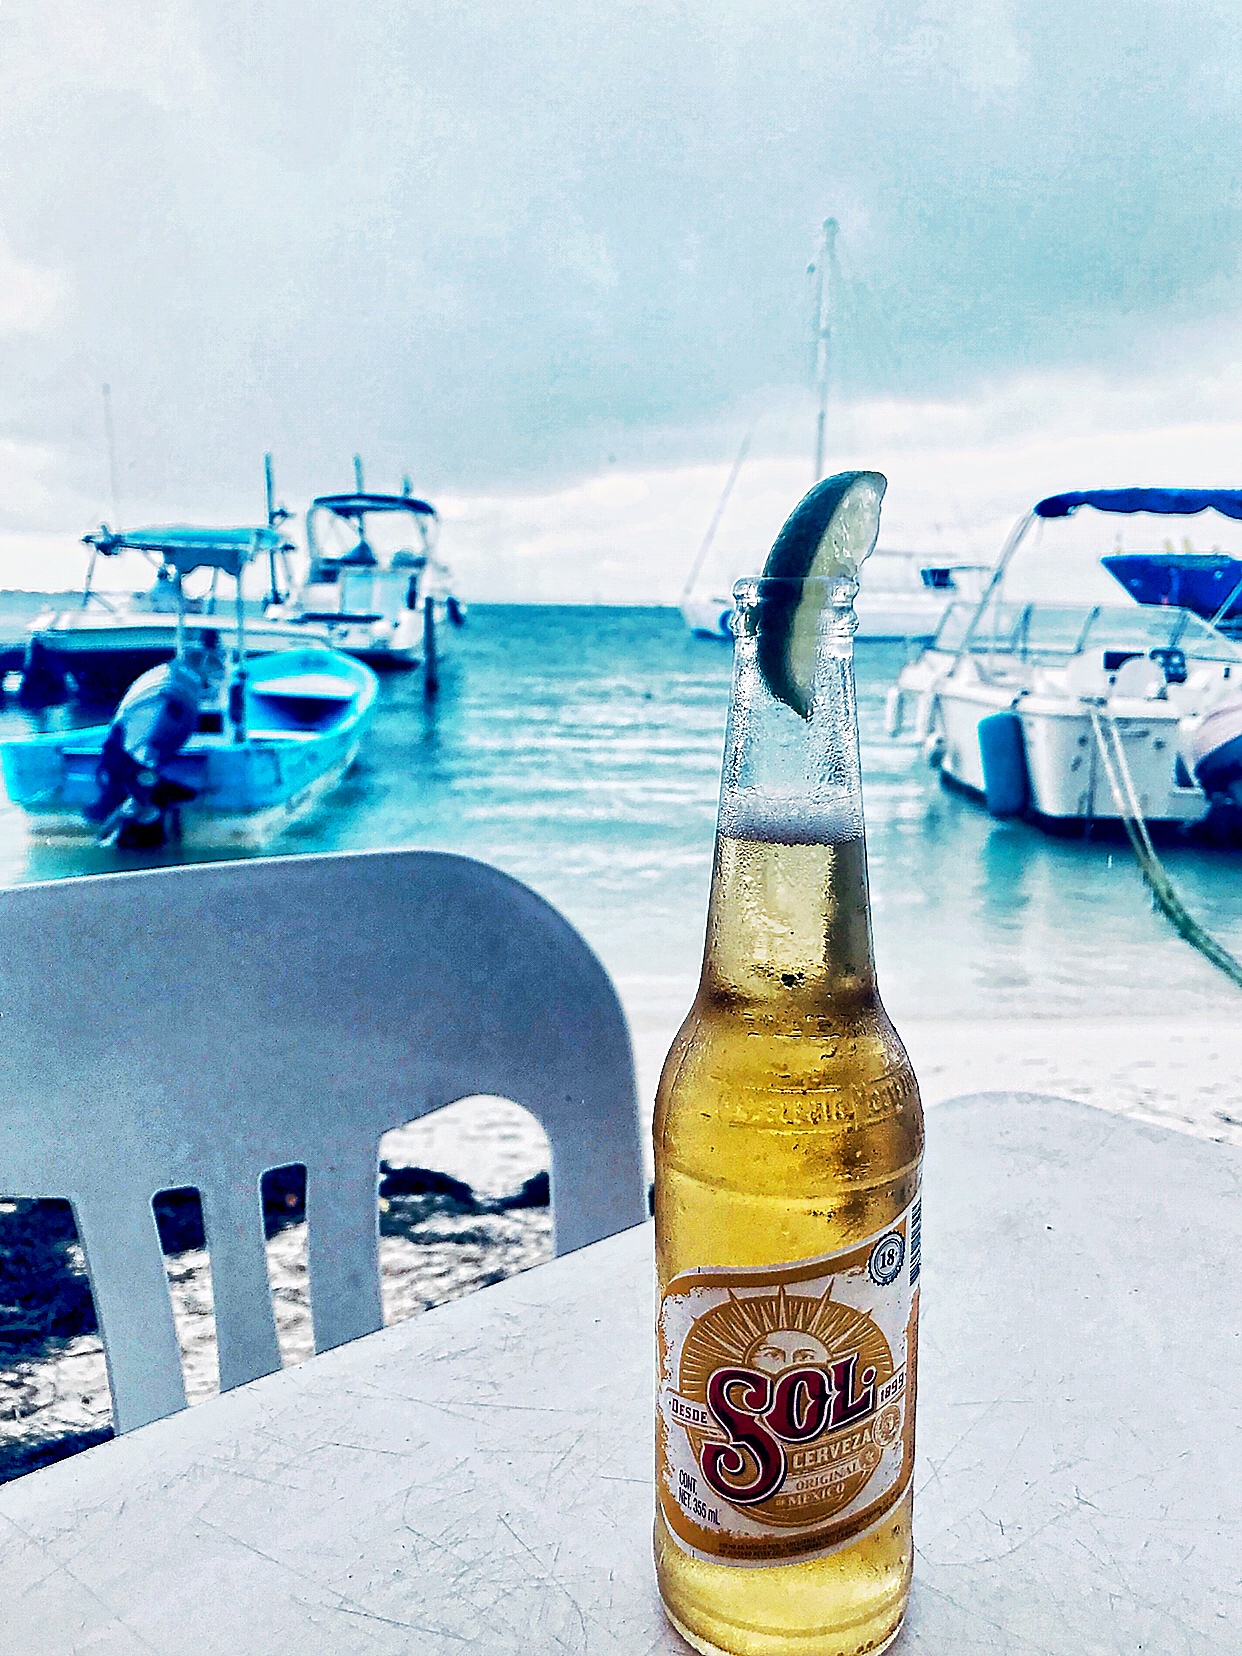 Isla Mujeres, Mexico: What To Eat And Where To Drink